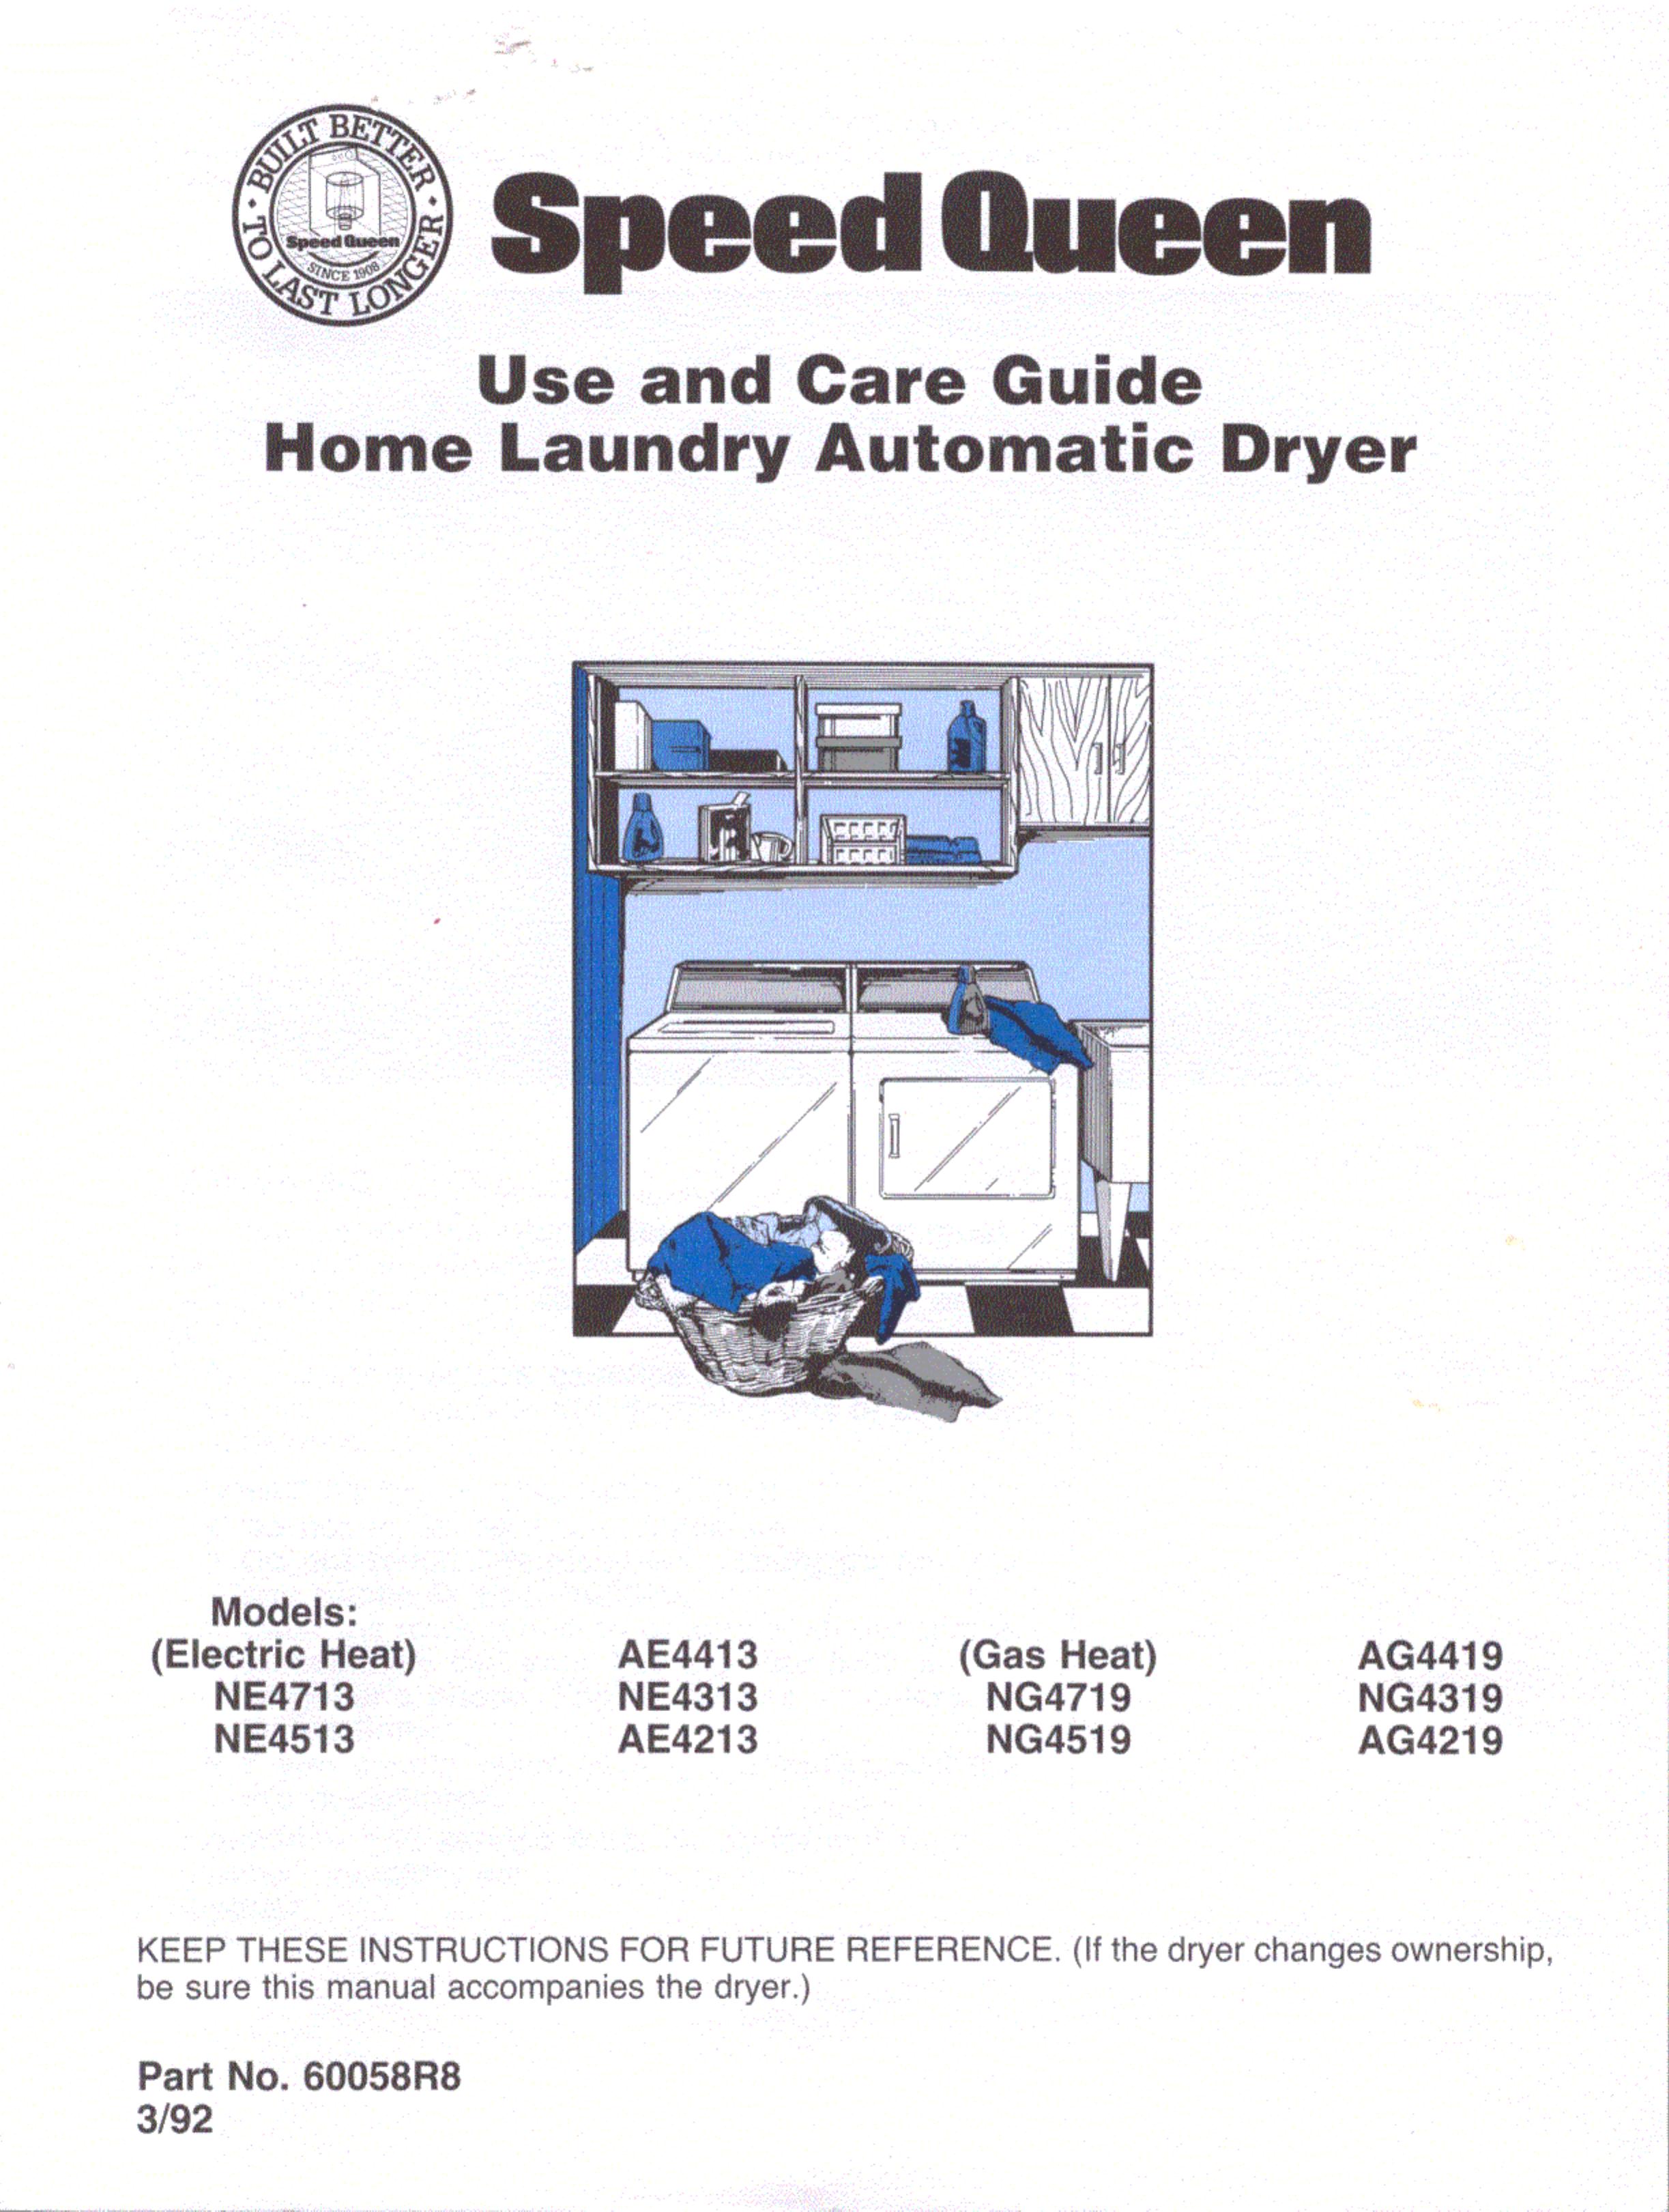 Speed Queen AE4213 Clothes Dryer User Manual